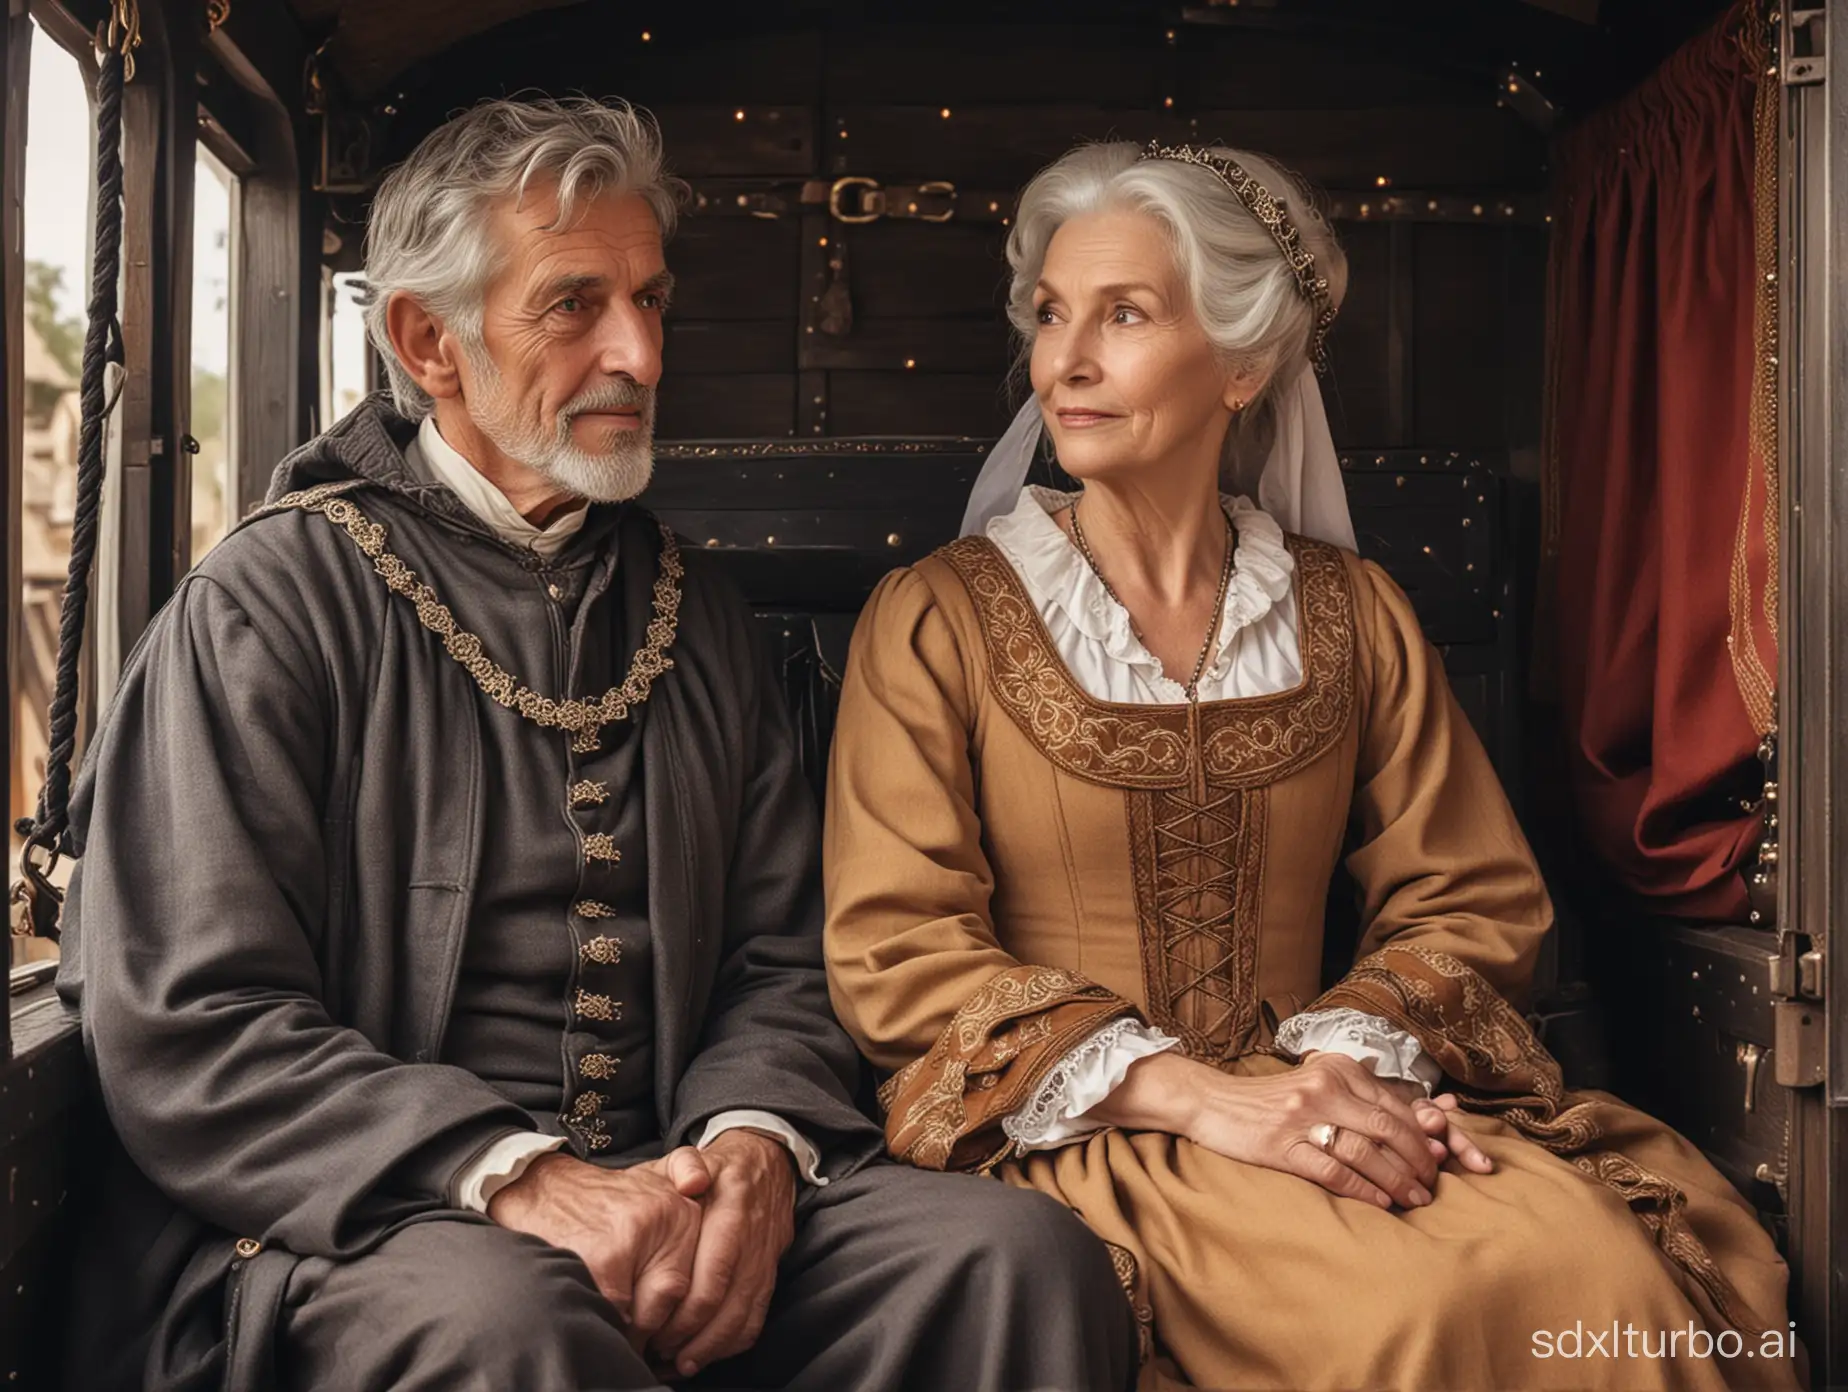 Medieval-Elderly-Couple-in-Loving-Embrace-Inside-Covered-Stagecoach